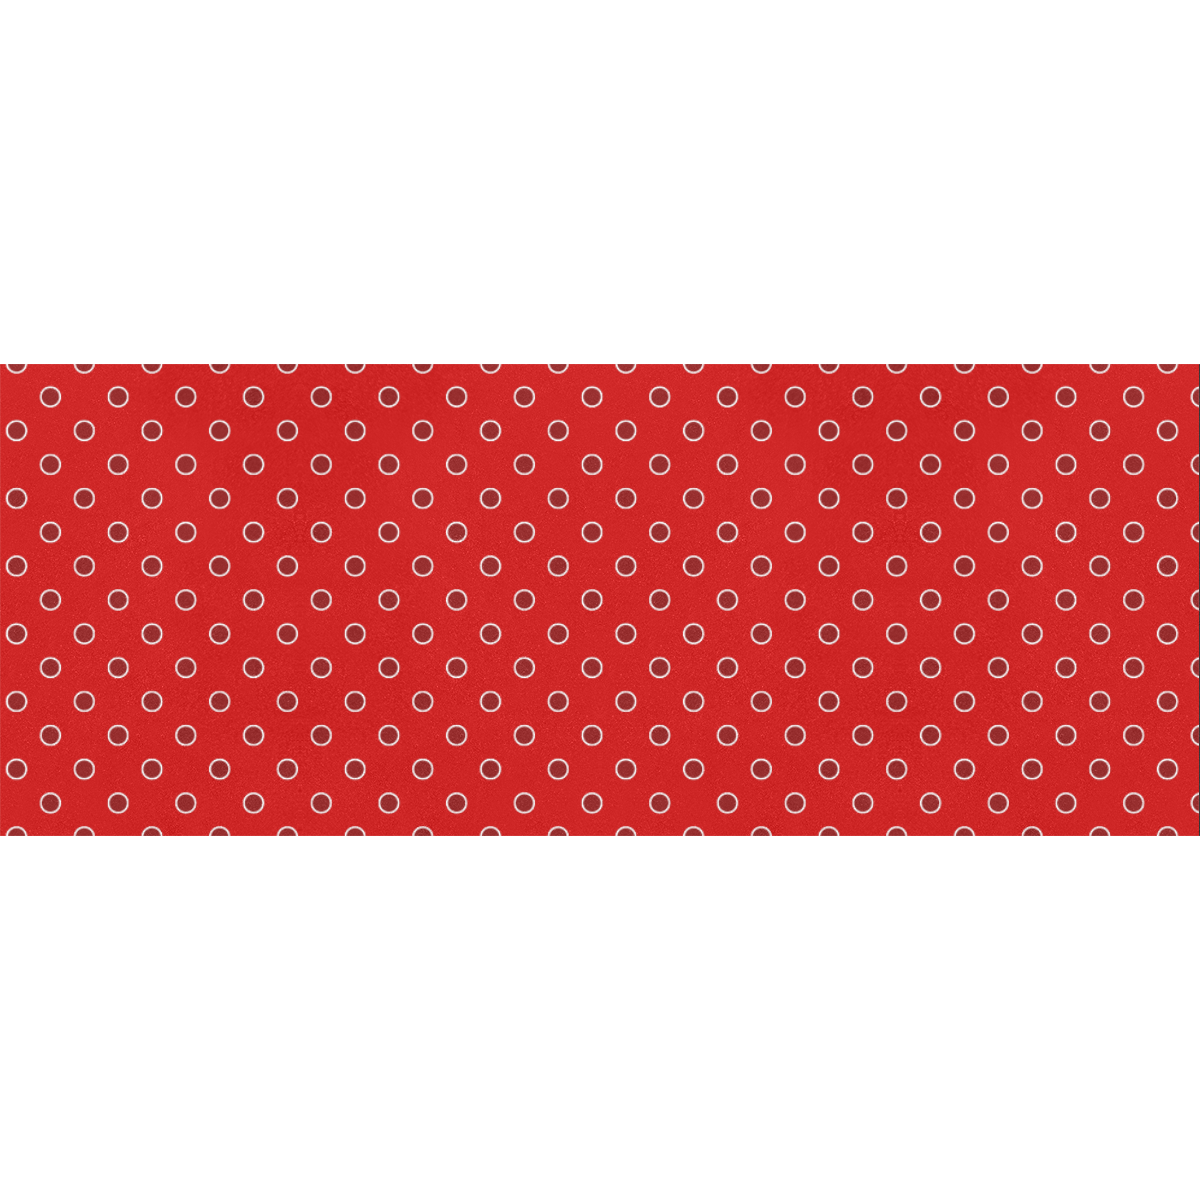 Red Polka Dots on Red Gift Wrapping Paper 58"x 23" (5 Rolls)